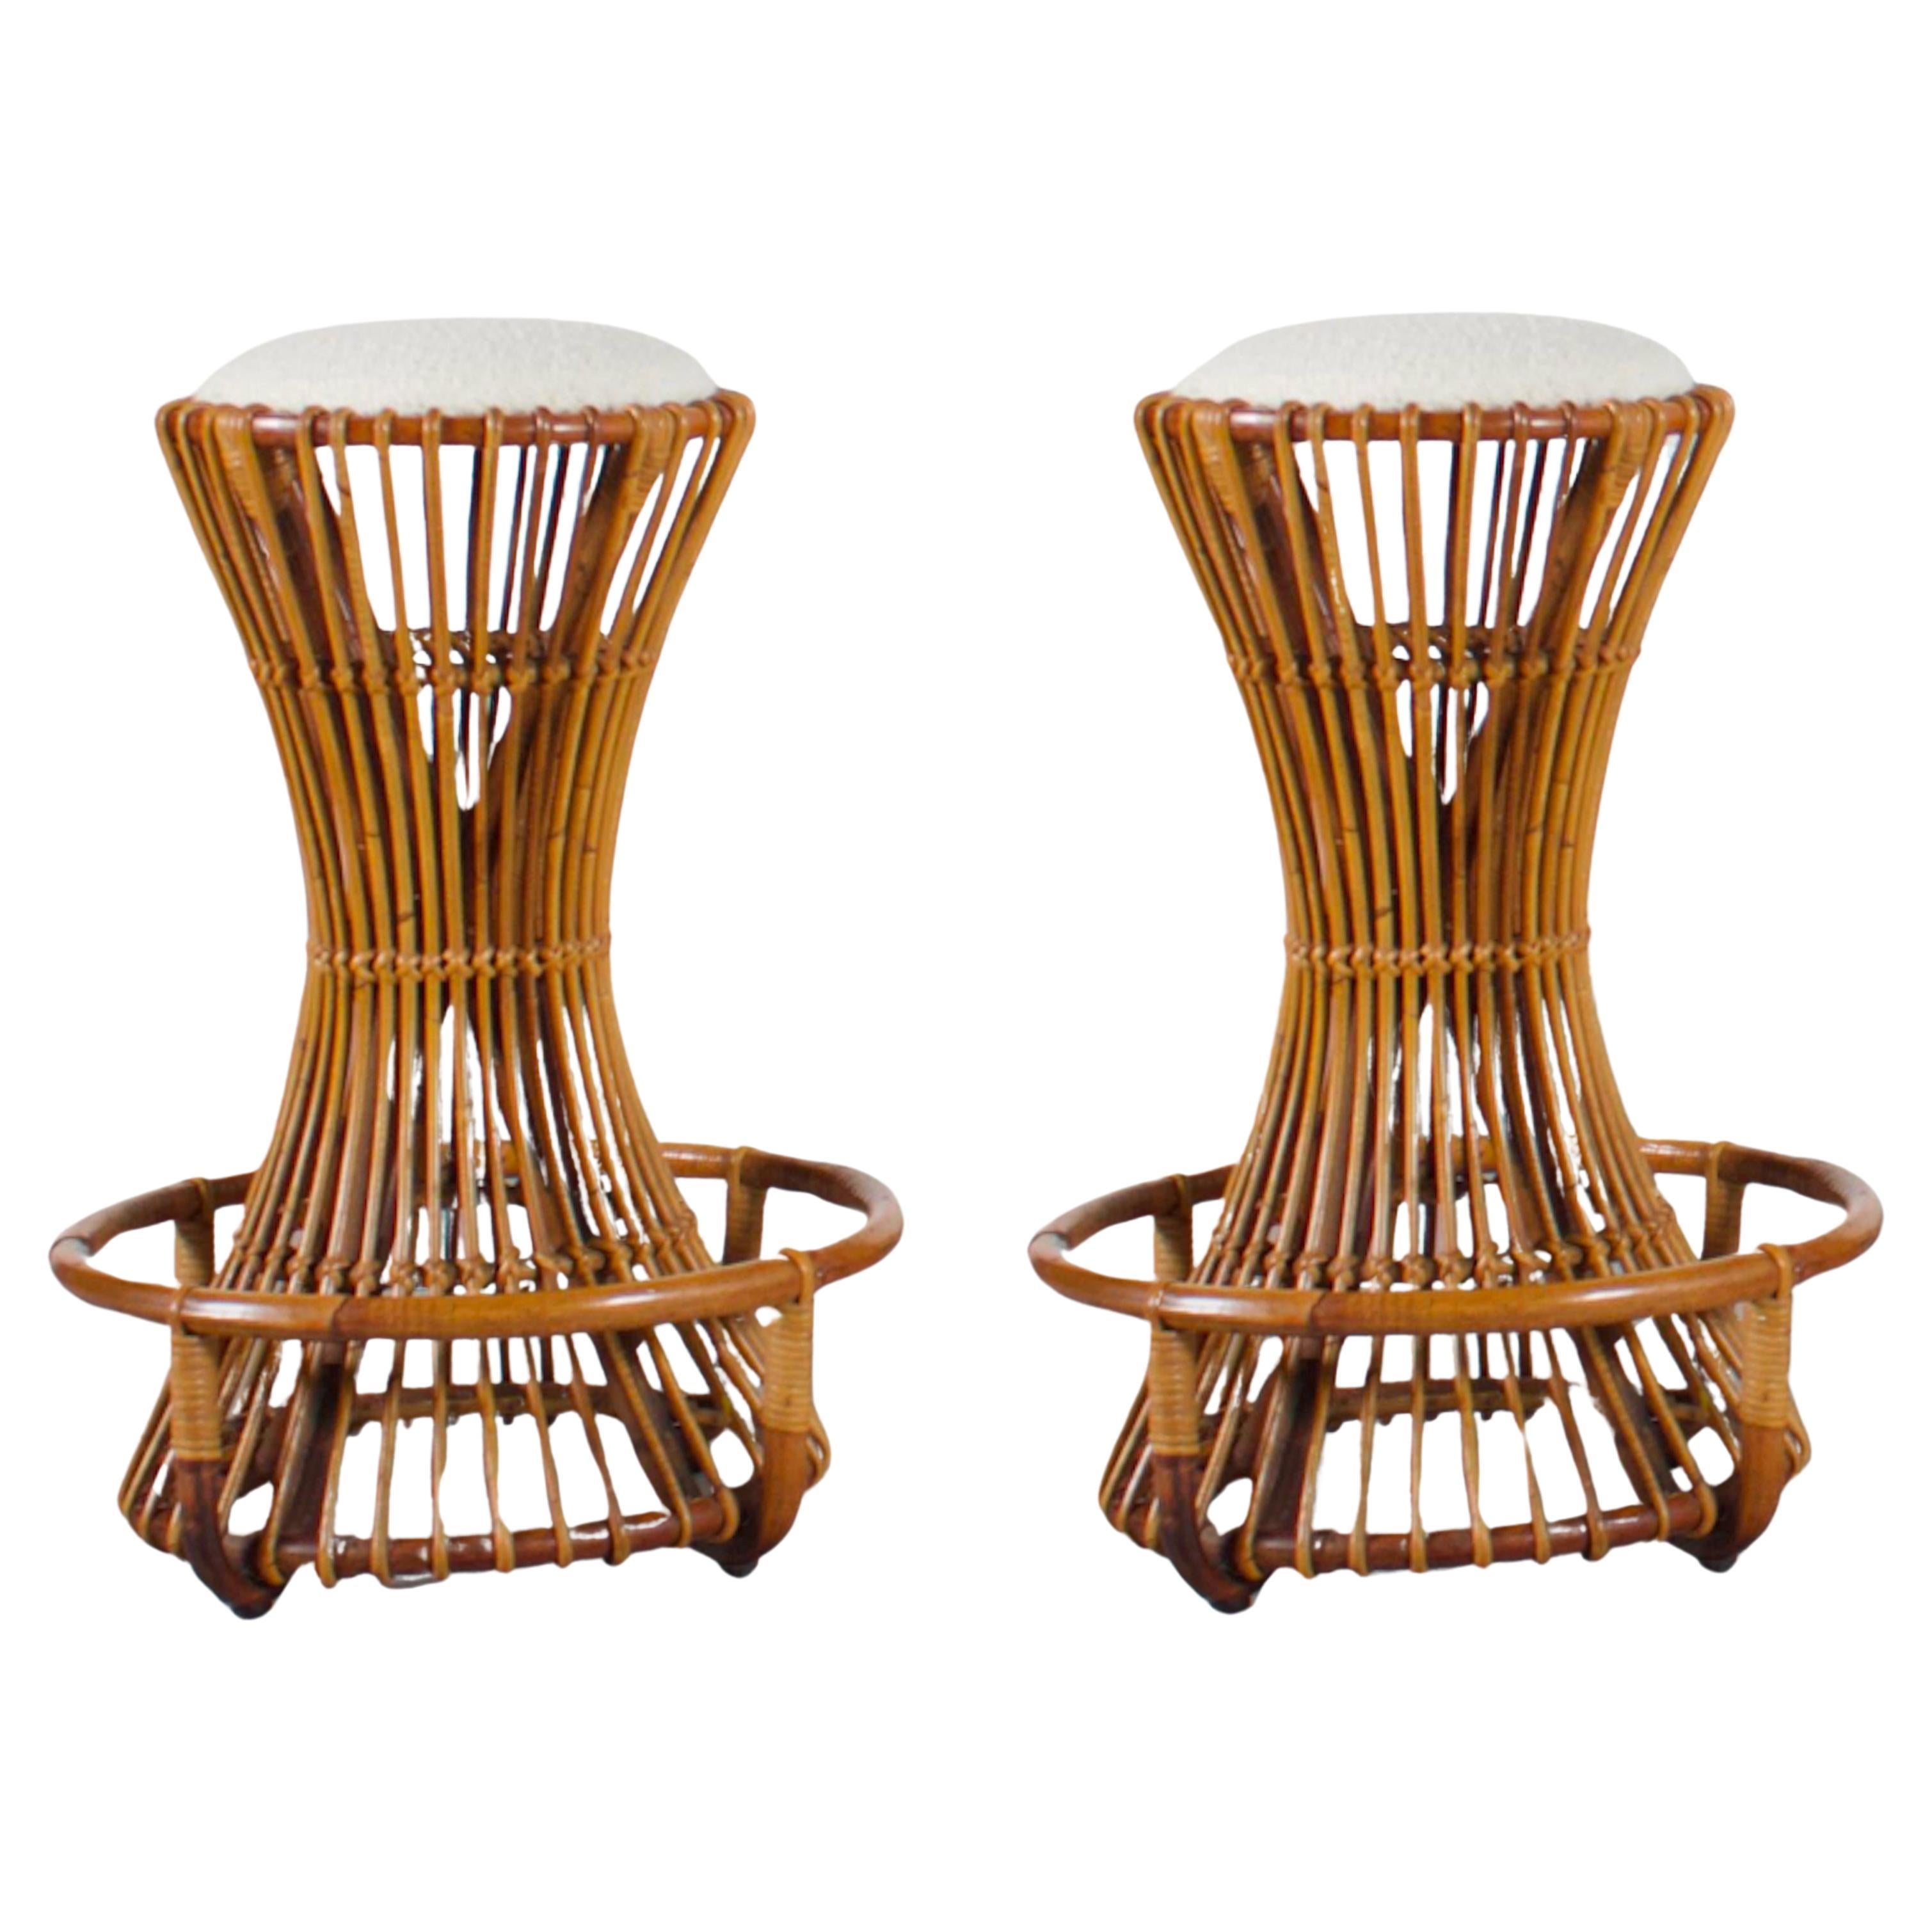 Pair of Sculptural Rattan Bar Stools by Tito Agnoli, Italy For Sale